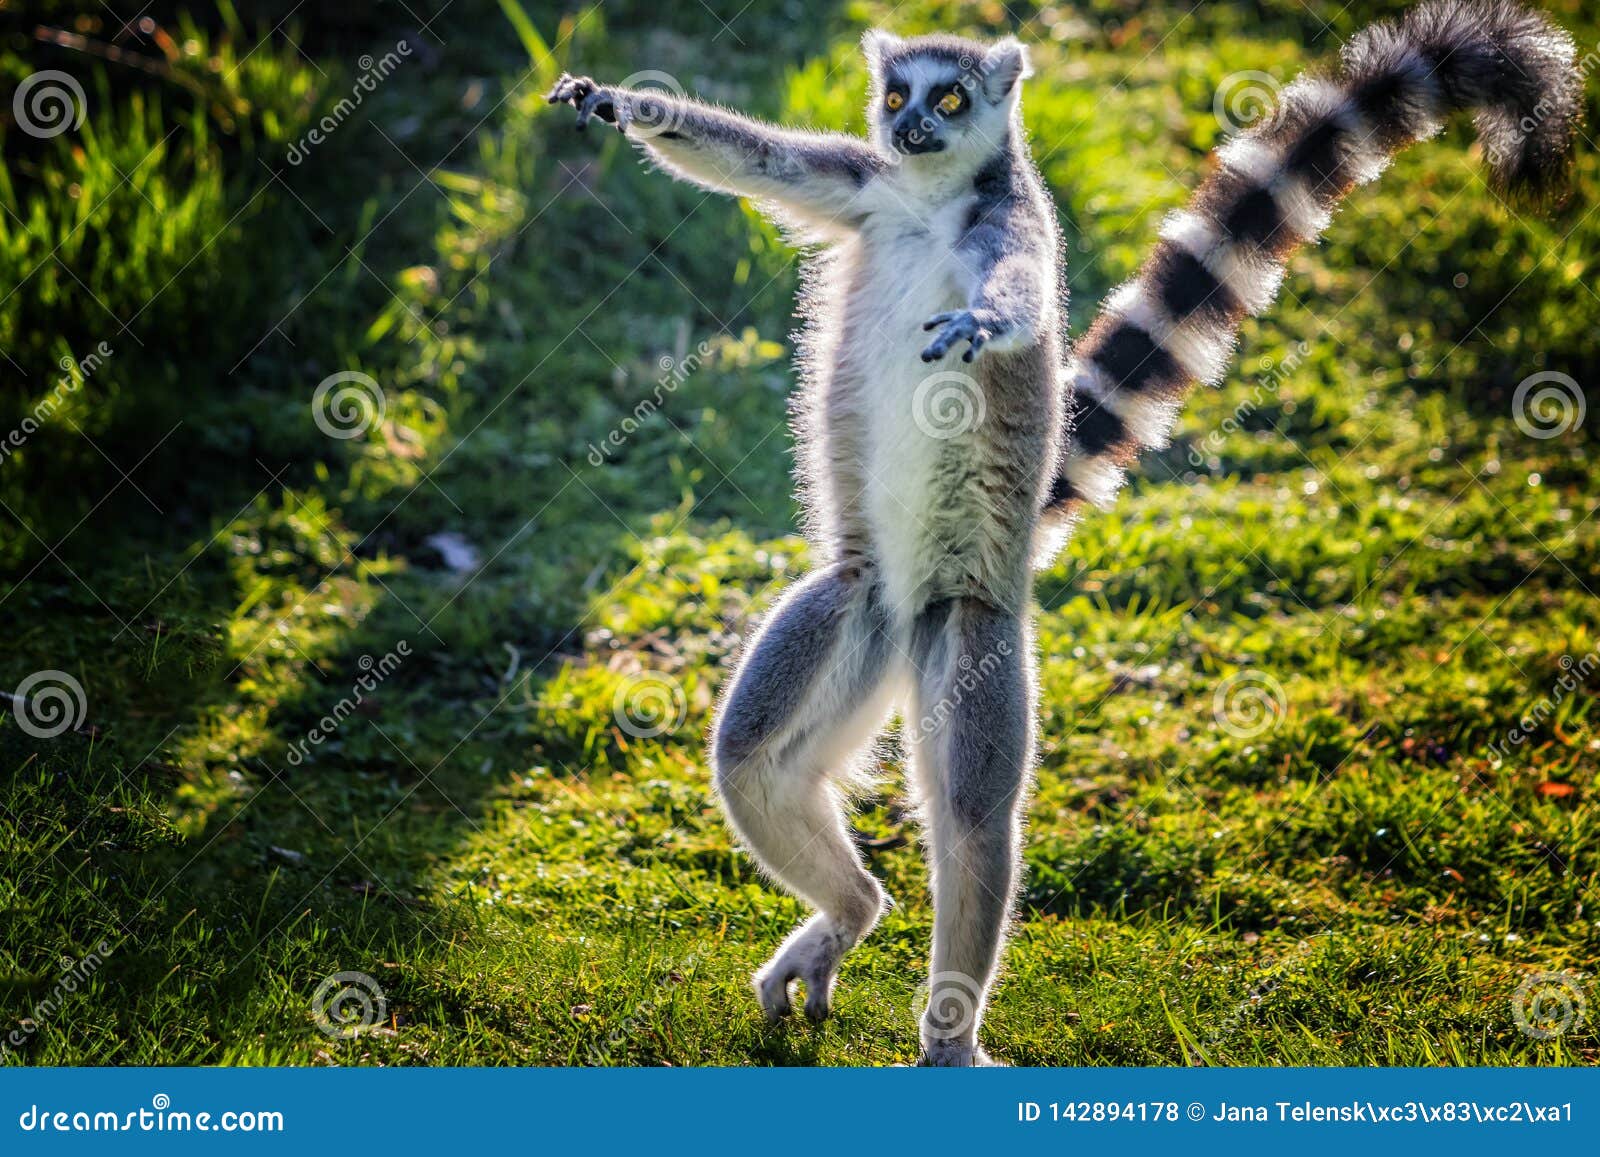 Ringtailed Lemur is Dancing on Green Grass. he Plays and Performs